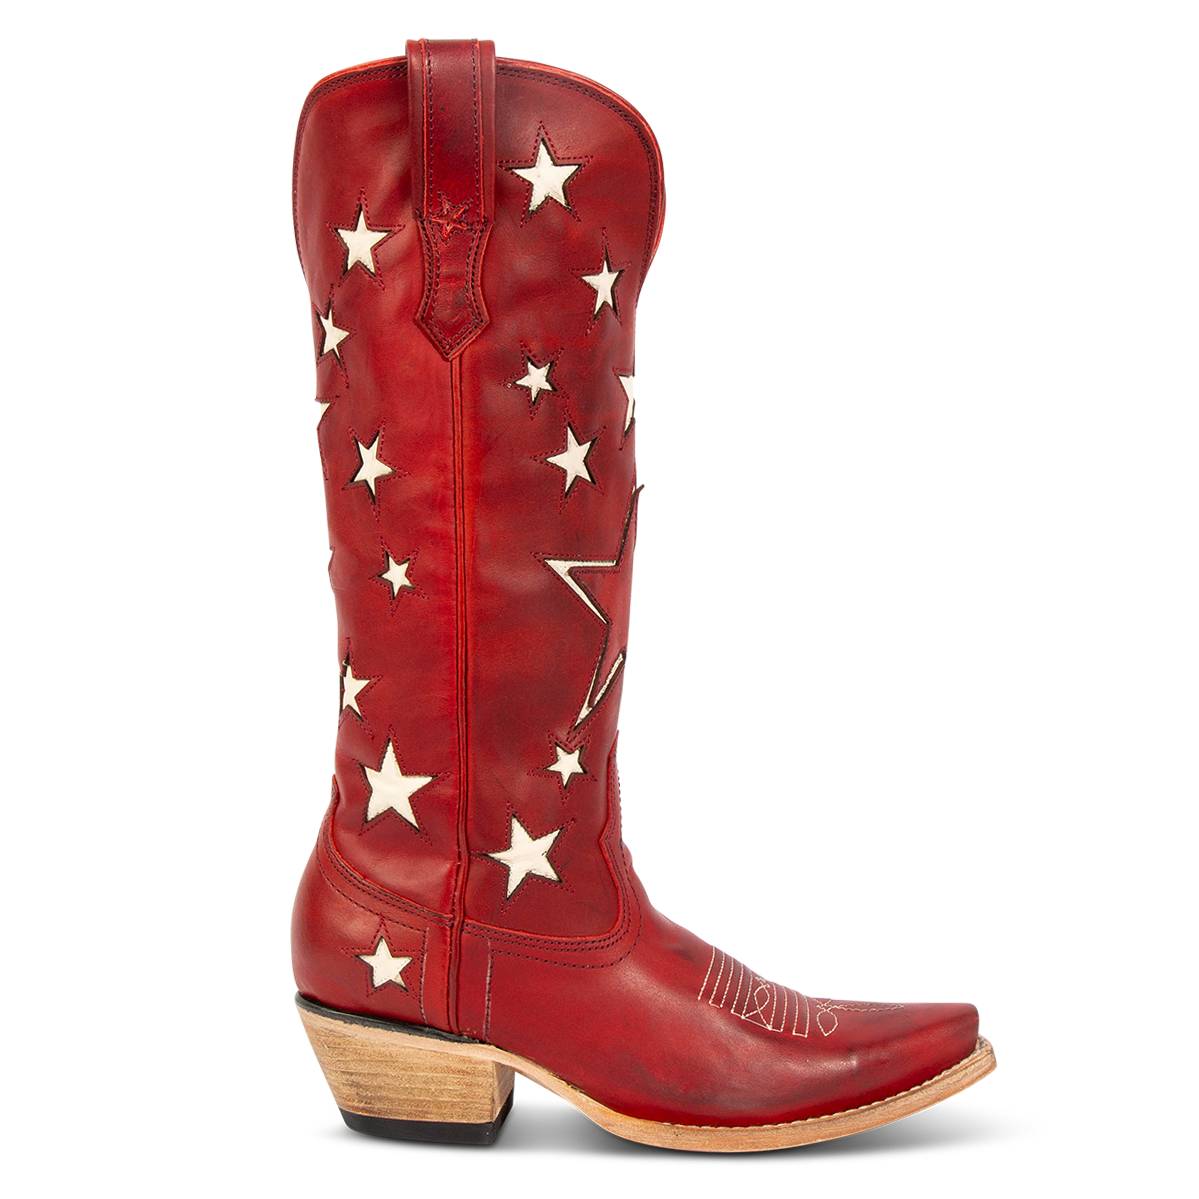 FREEBIRD women's Starzz red leather cowboy boot with two-toned leather star inlay detailing traditional stitching and snip toe construction